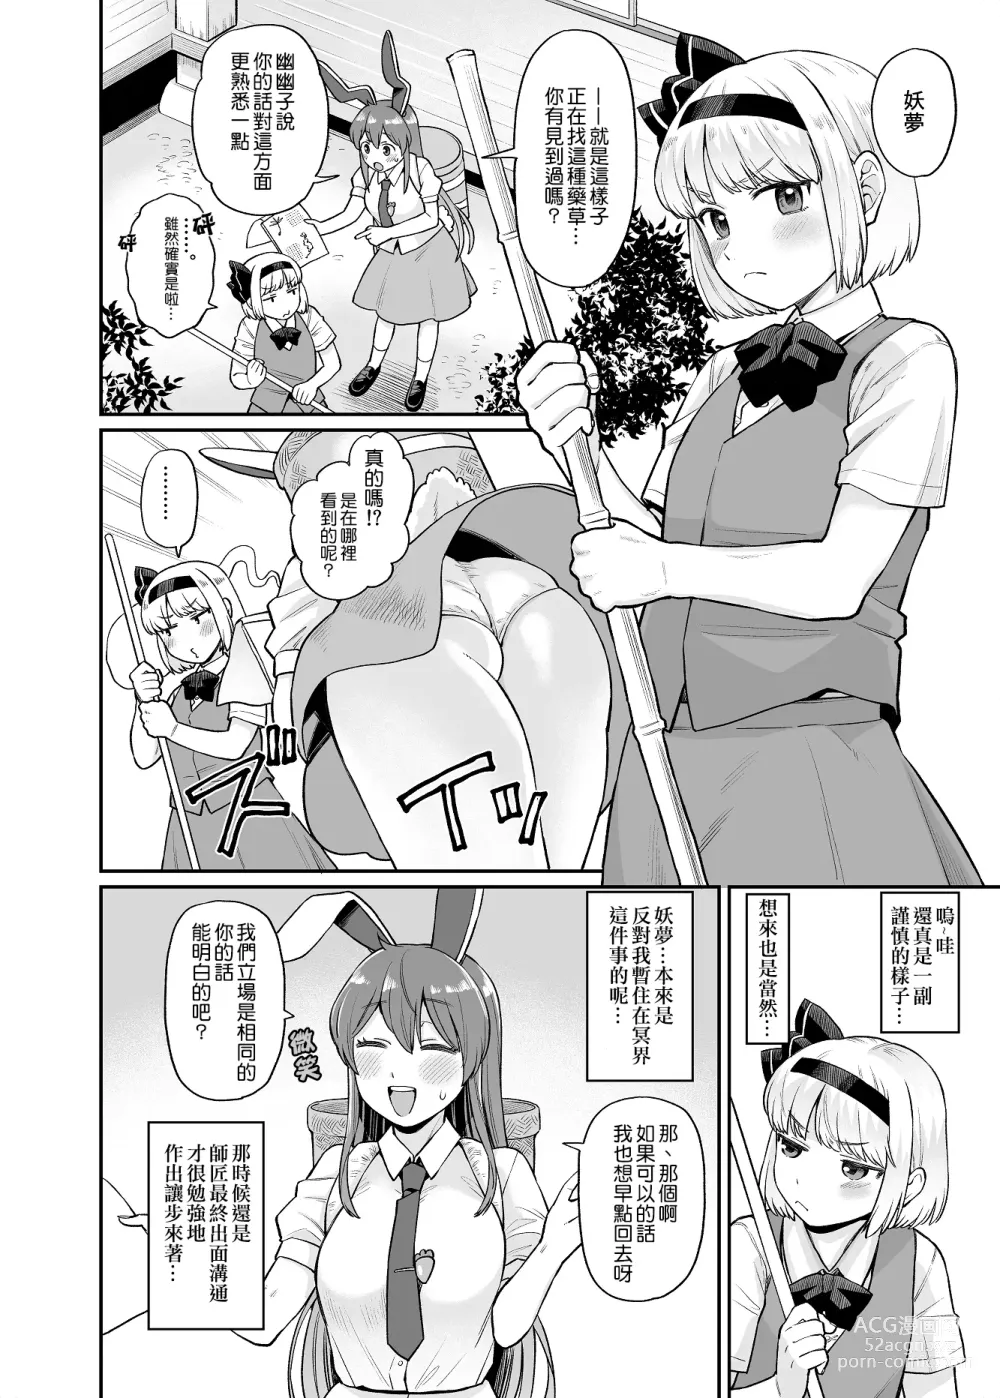 Page 2 of doujinshi 乌冬铃仙系列第1话